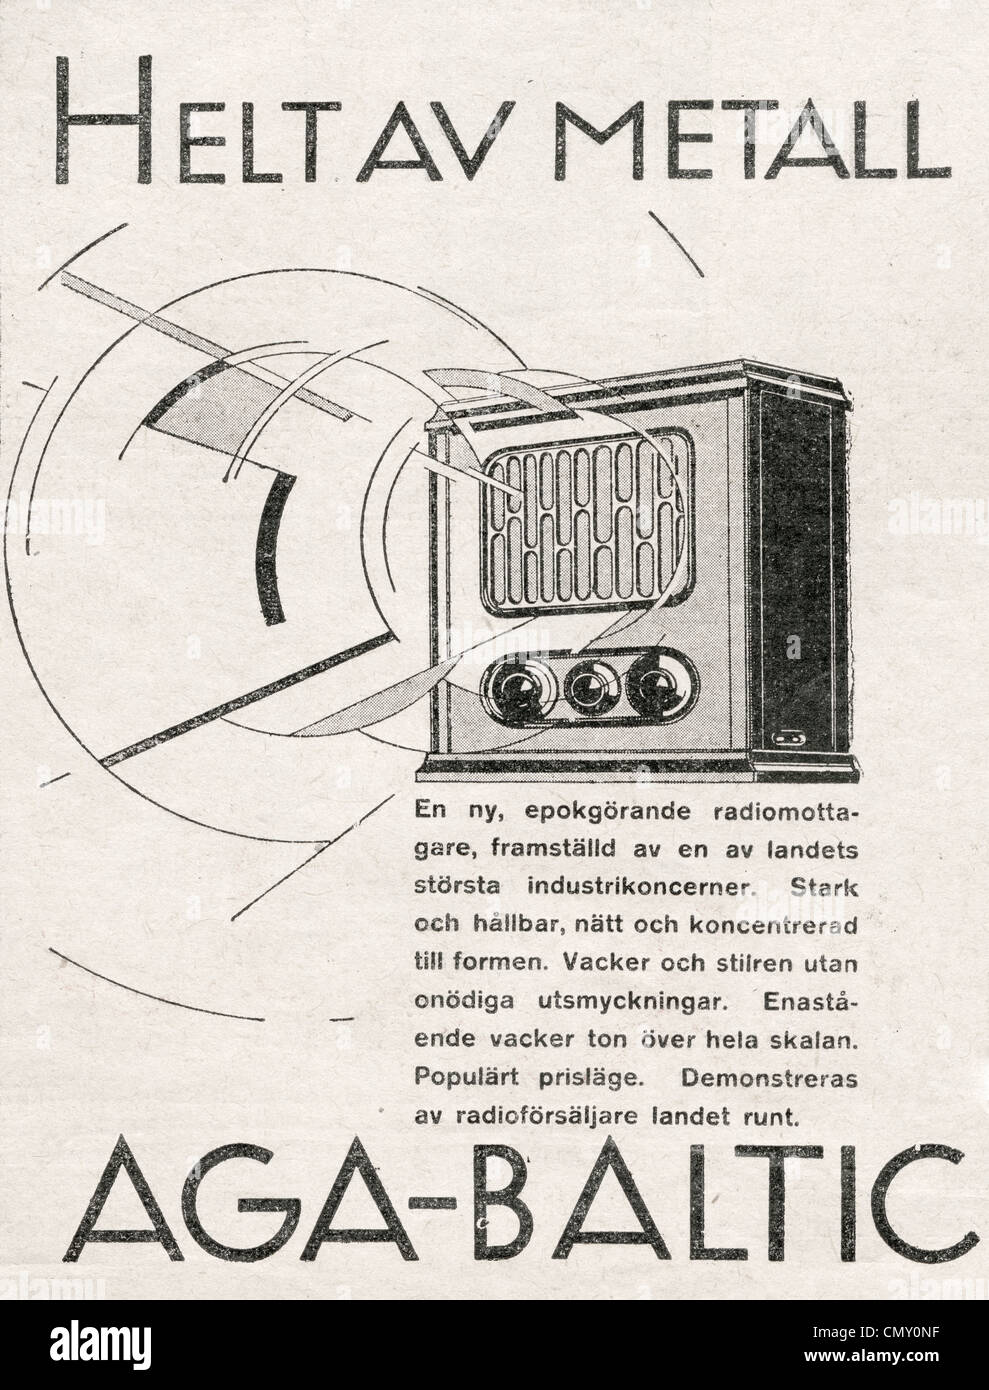 Swedish advertisement from 1930. Aga-Baltic radio. EDITORIAL USE ONLY! Stock Photo